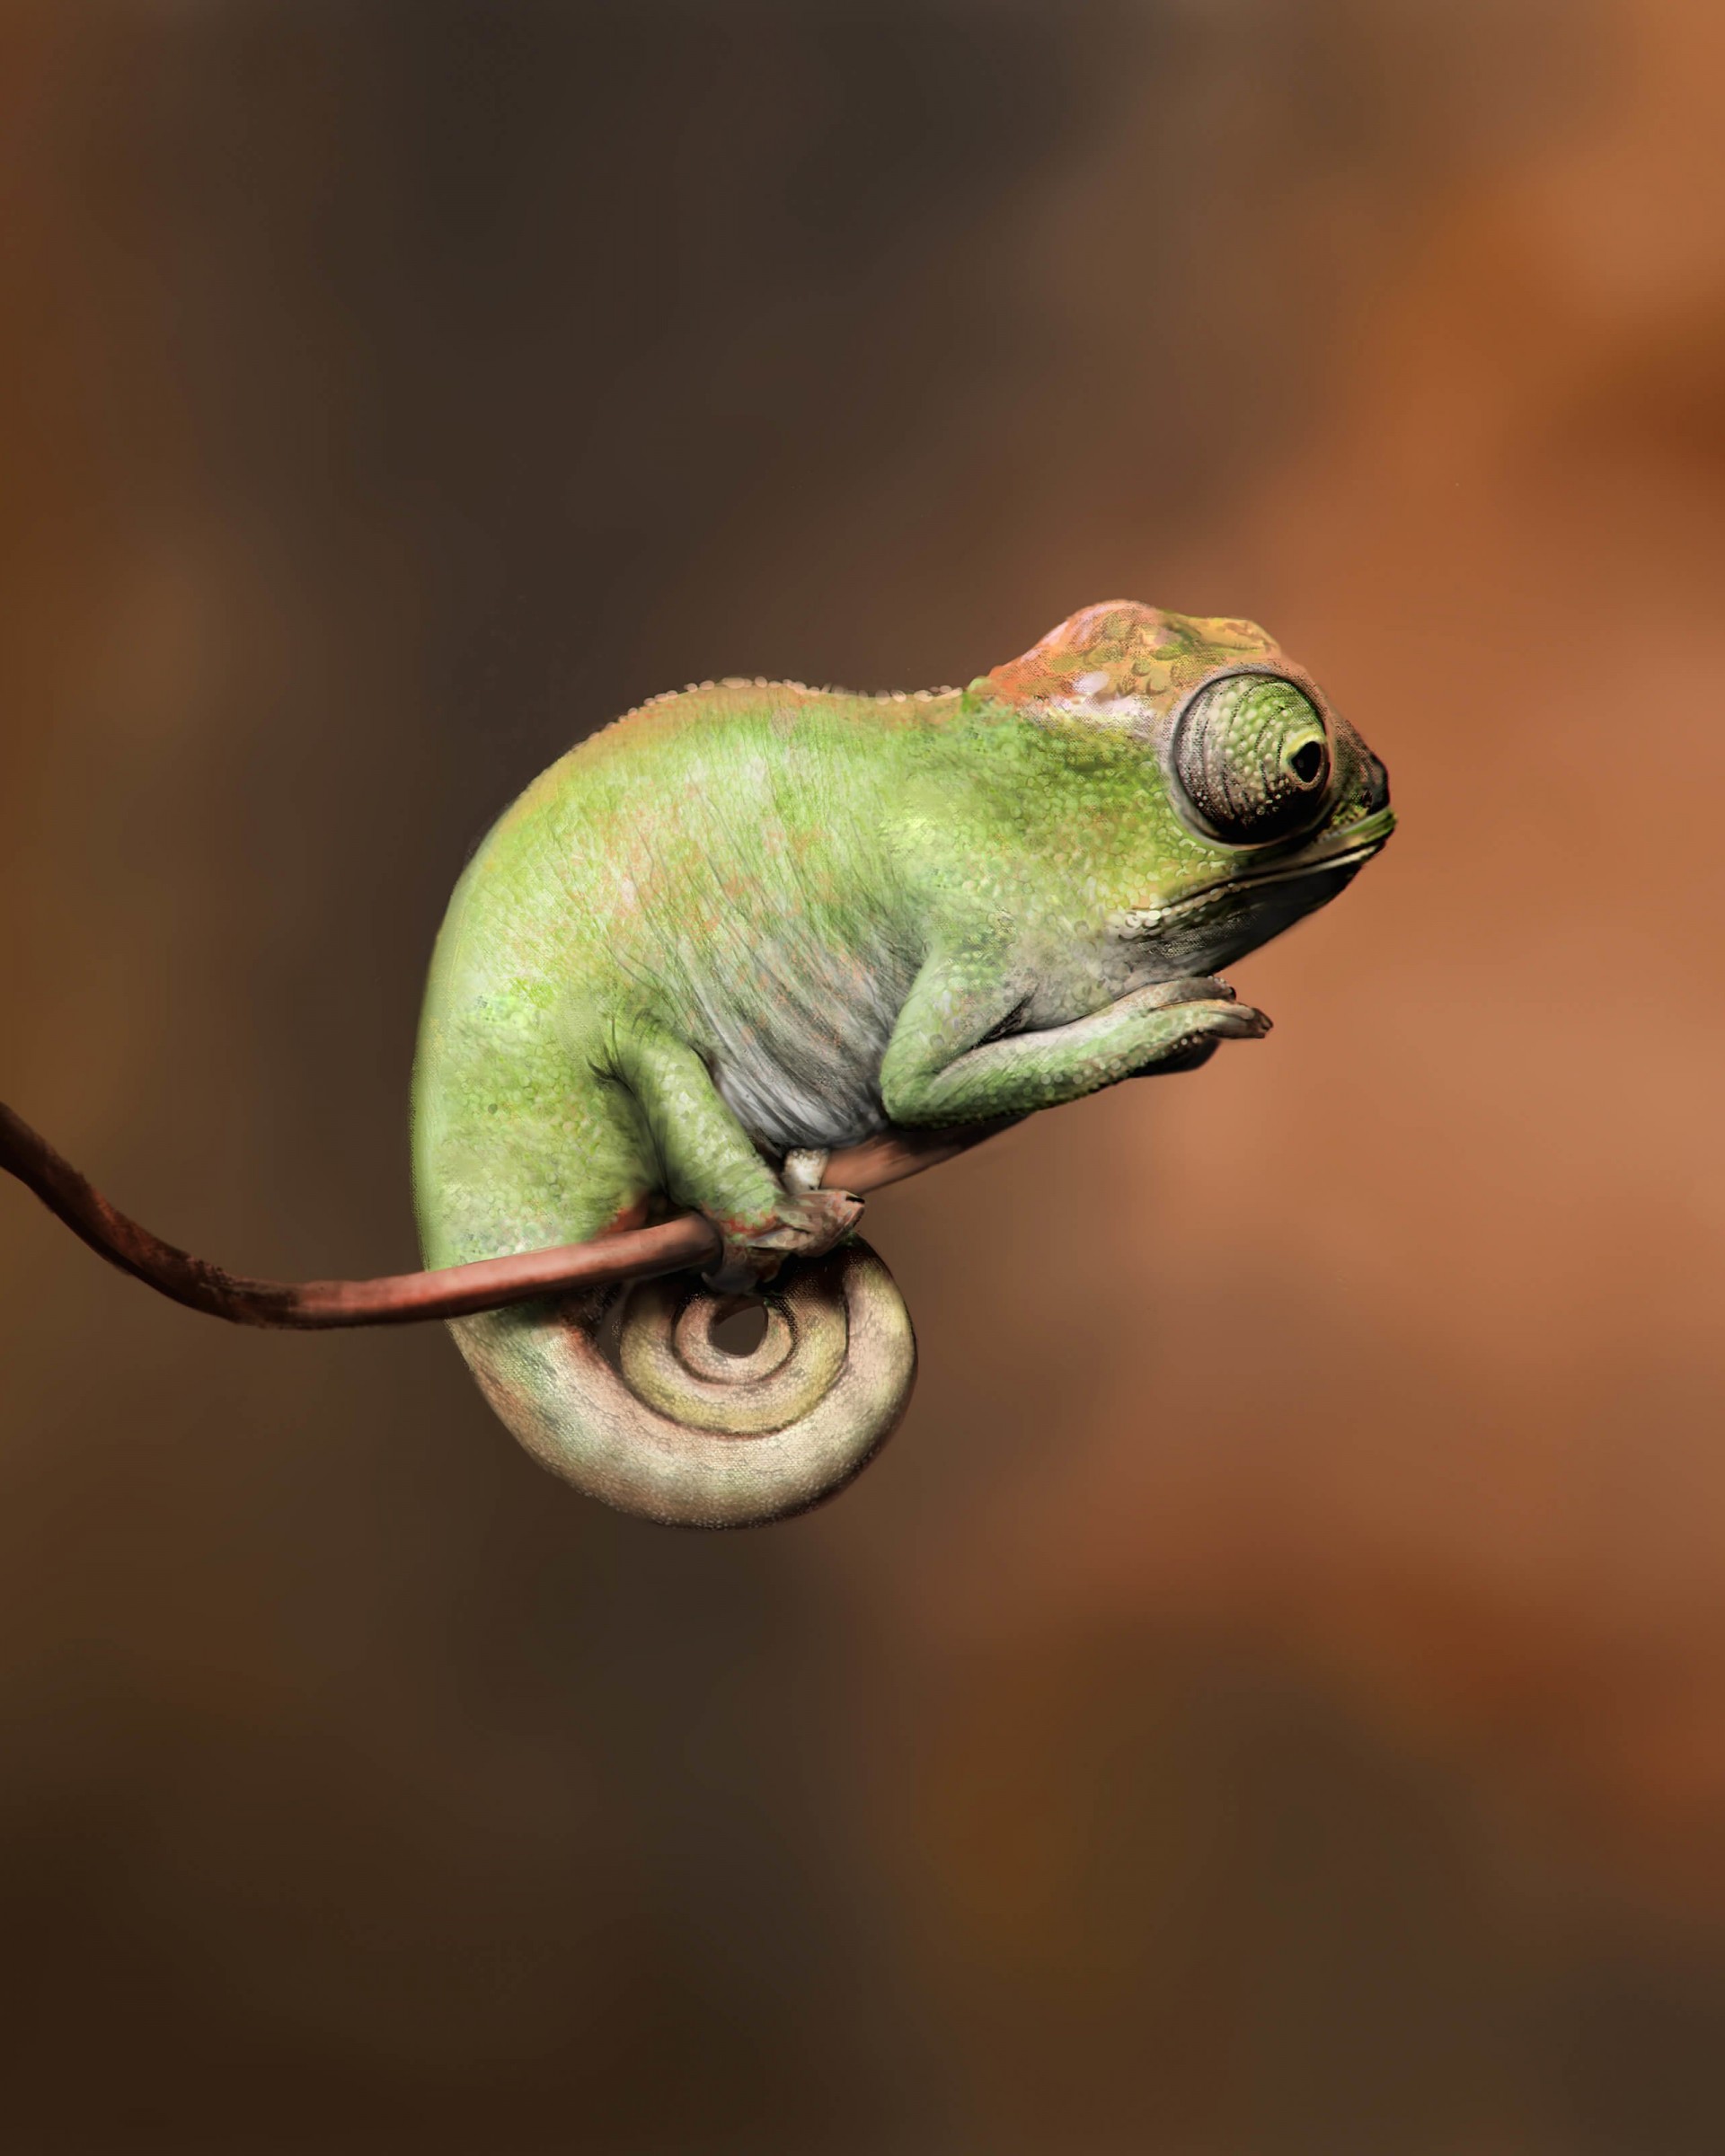 Baby Chameleon Perching On a Twisted Branch Wallpaper for Google Nexus 7